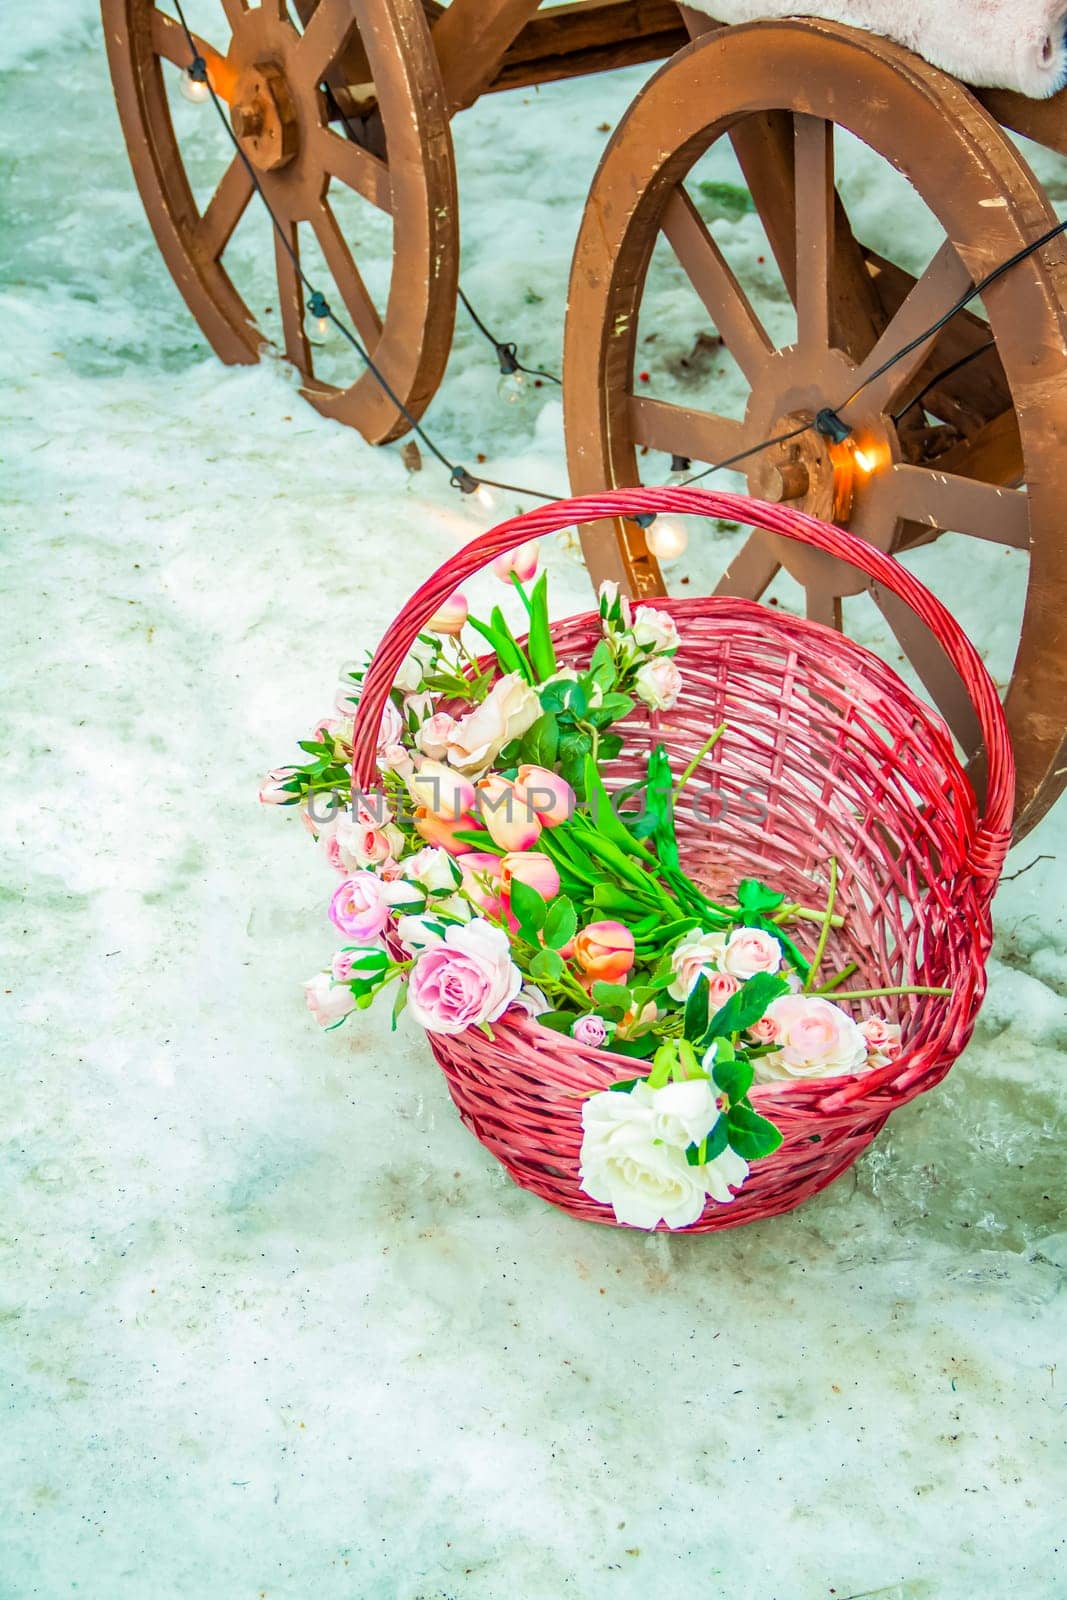 A wicker basket with beautiful flowers stands on the snow near the cart wheel. by Alina_Lebed